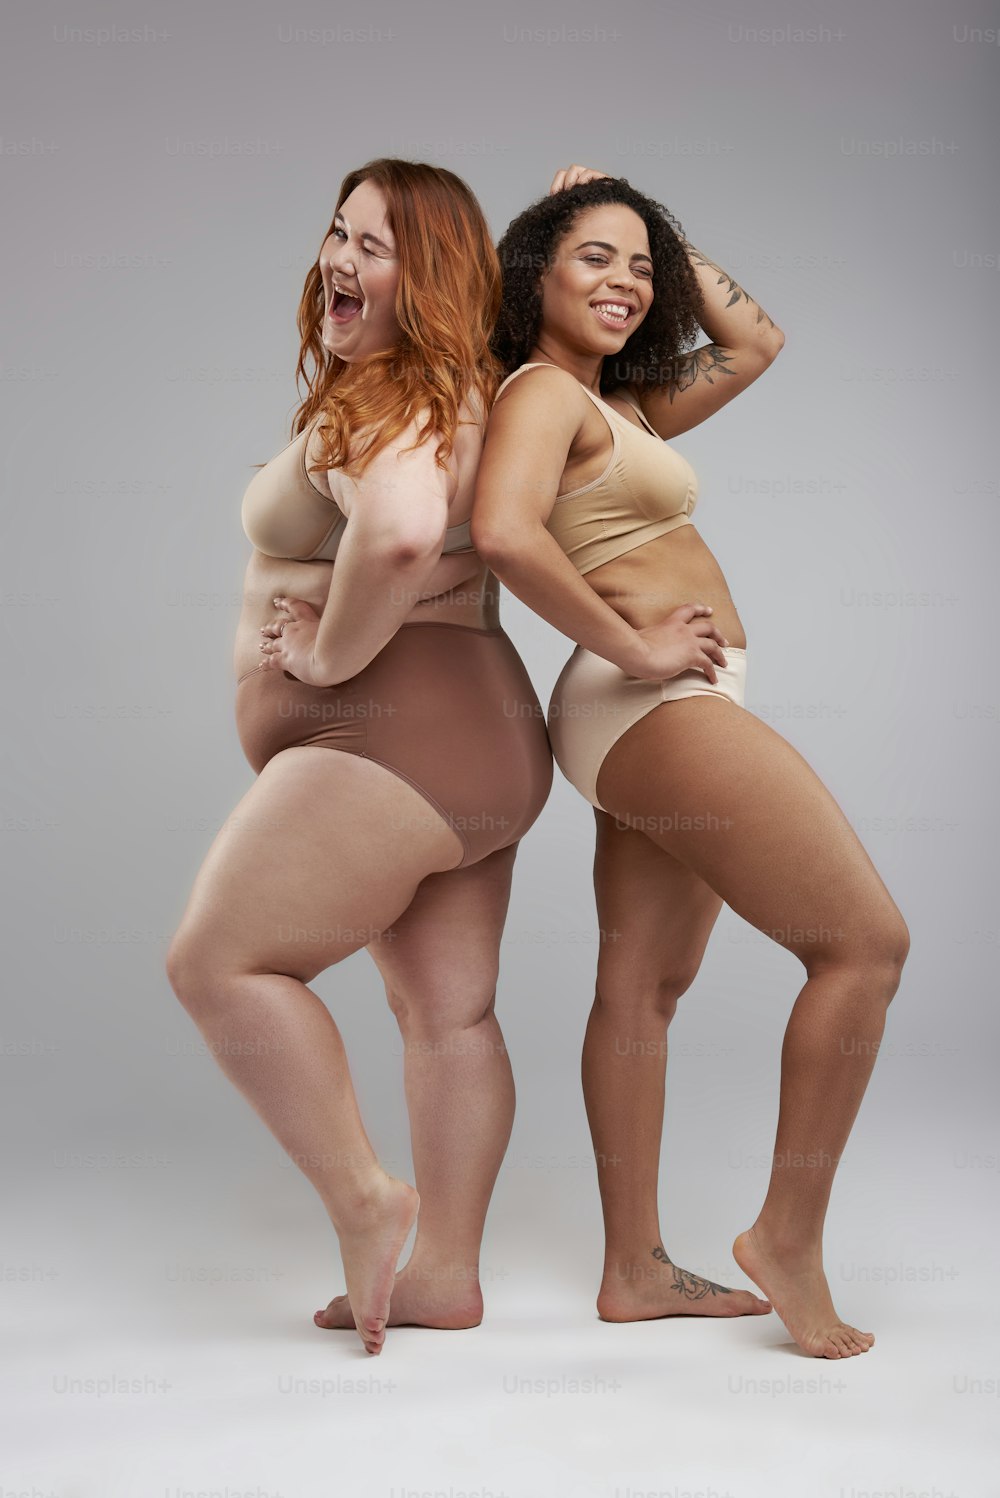 Caucasian woman and Afro American lady laughing together. Overweight concept